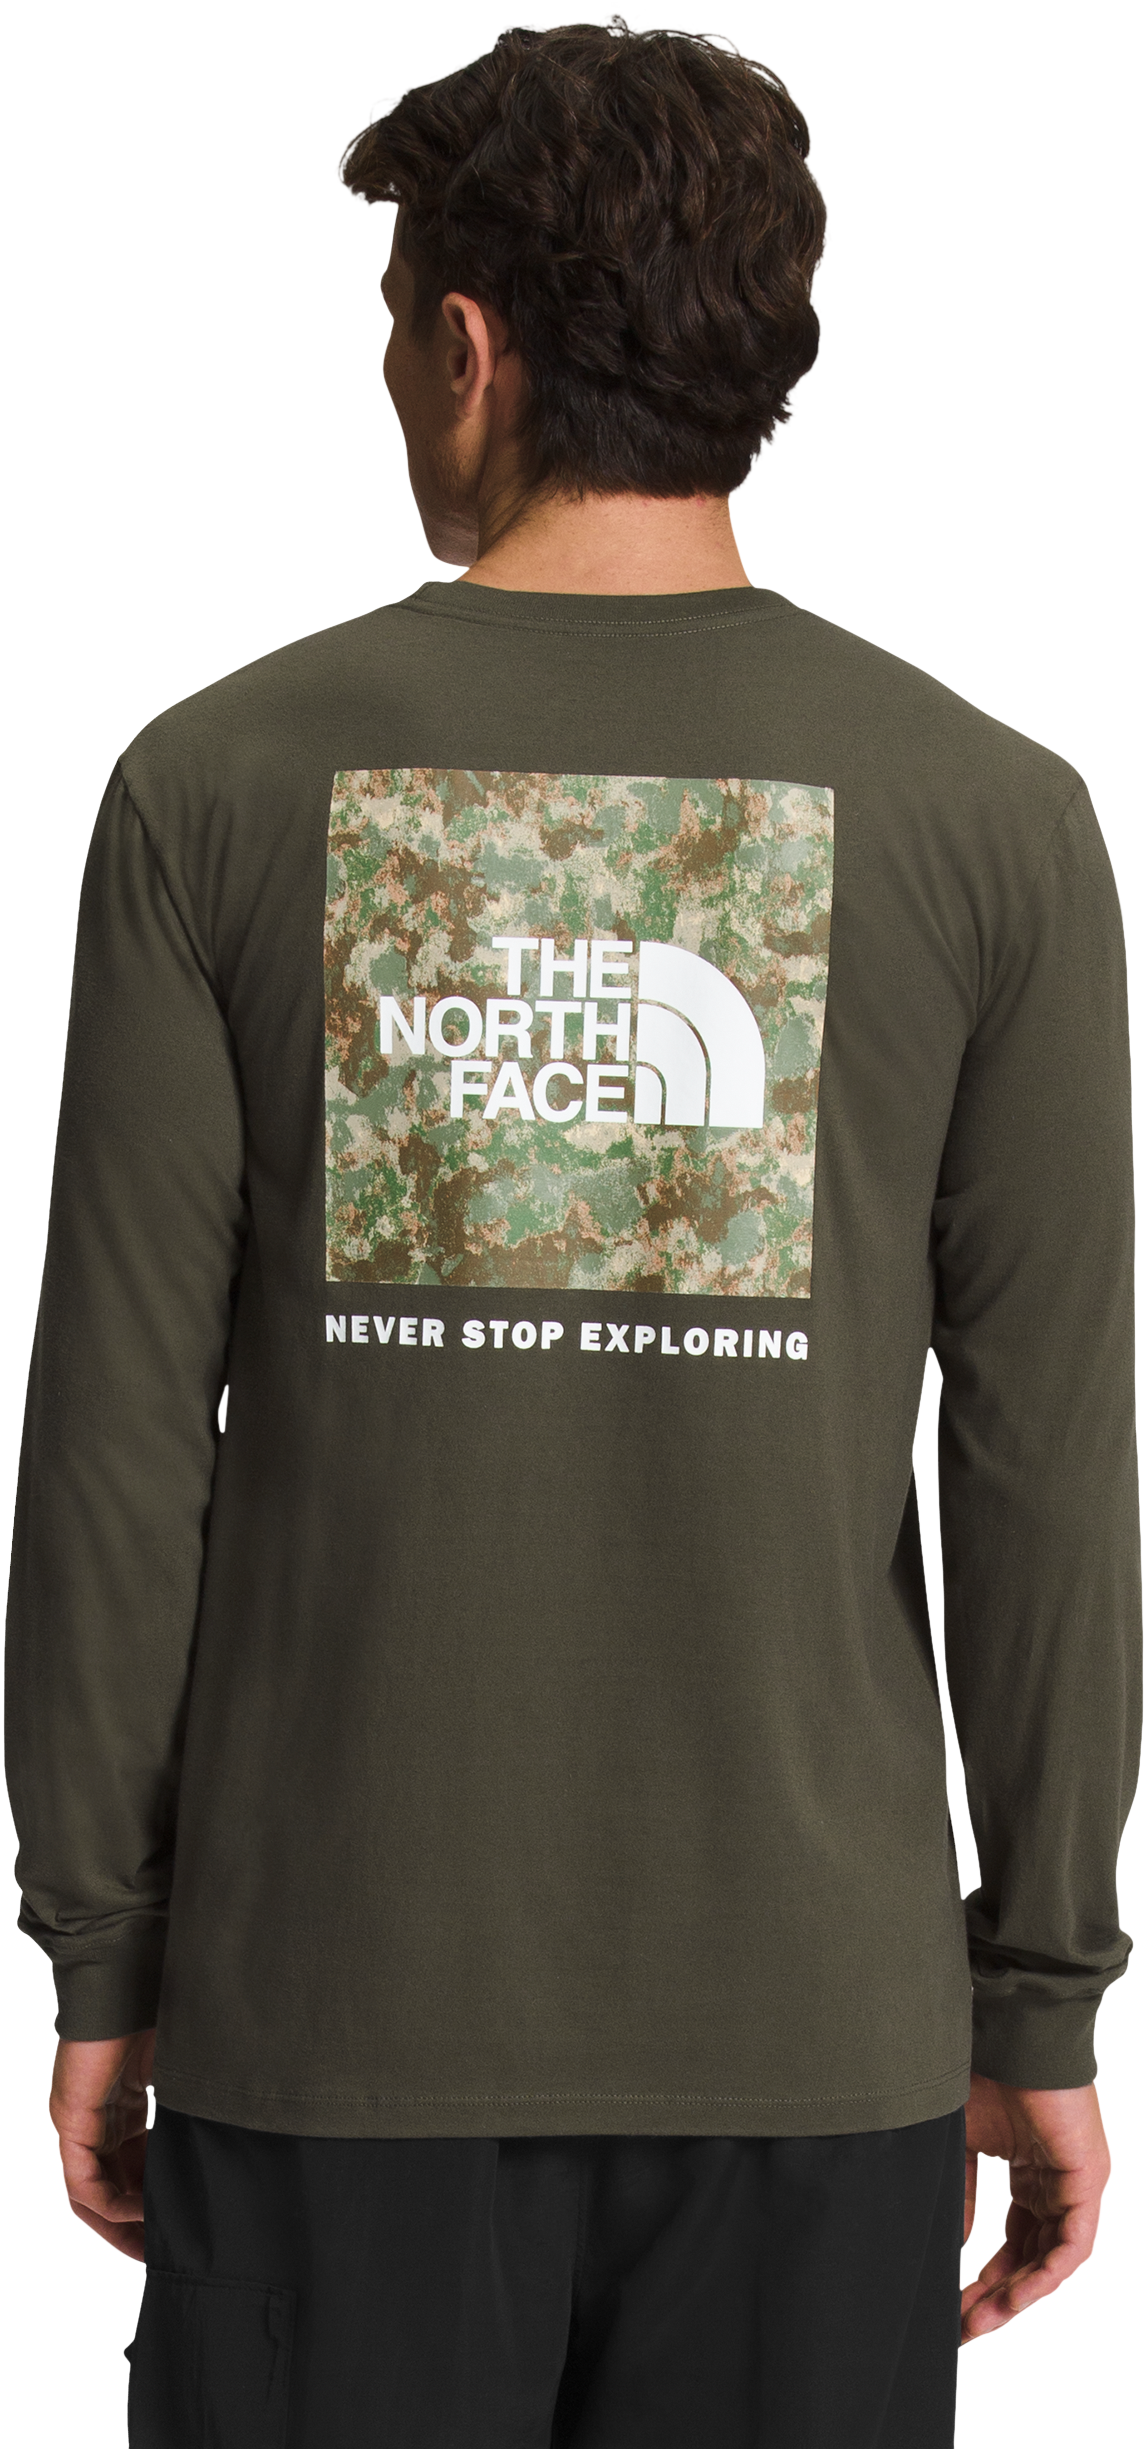 The North Face Box NSE Long-Sleeve Shirt for Men - New Taupe Green/Military Olive - 2XL